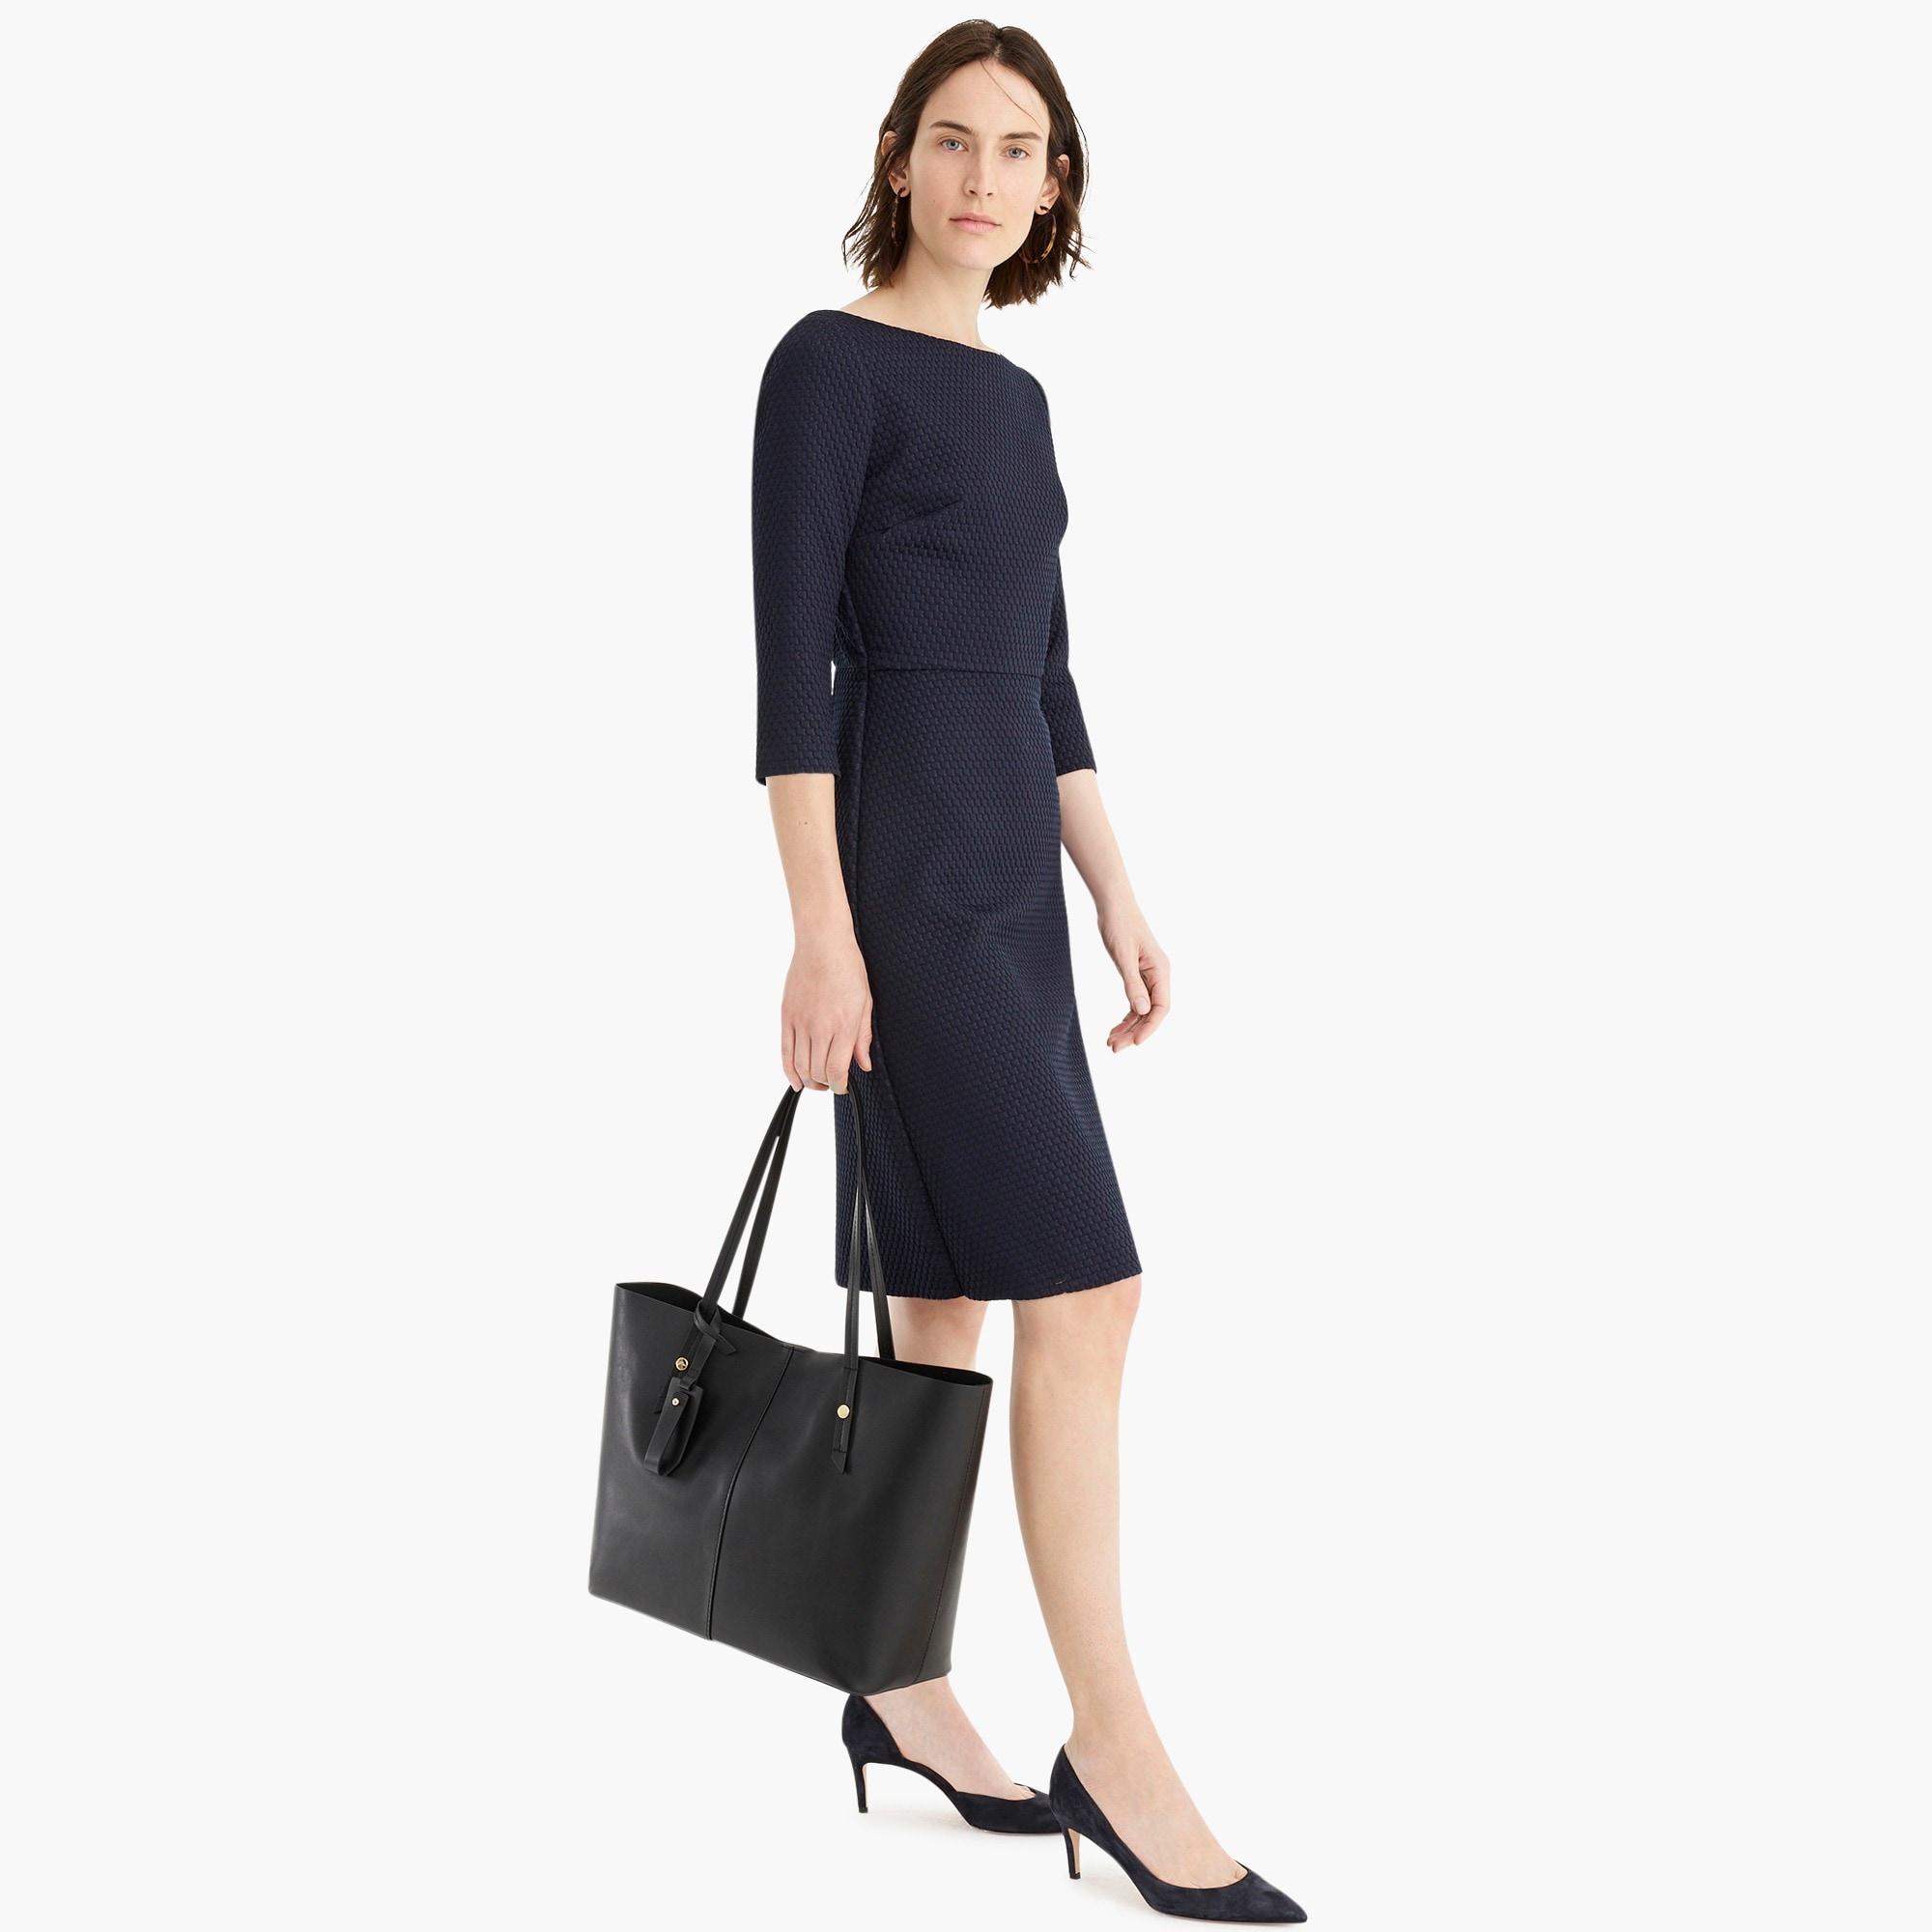 ATLANTIC Boat Neck Dress in Stretch Leather